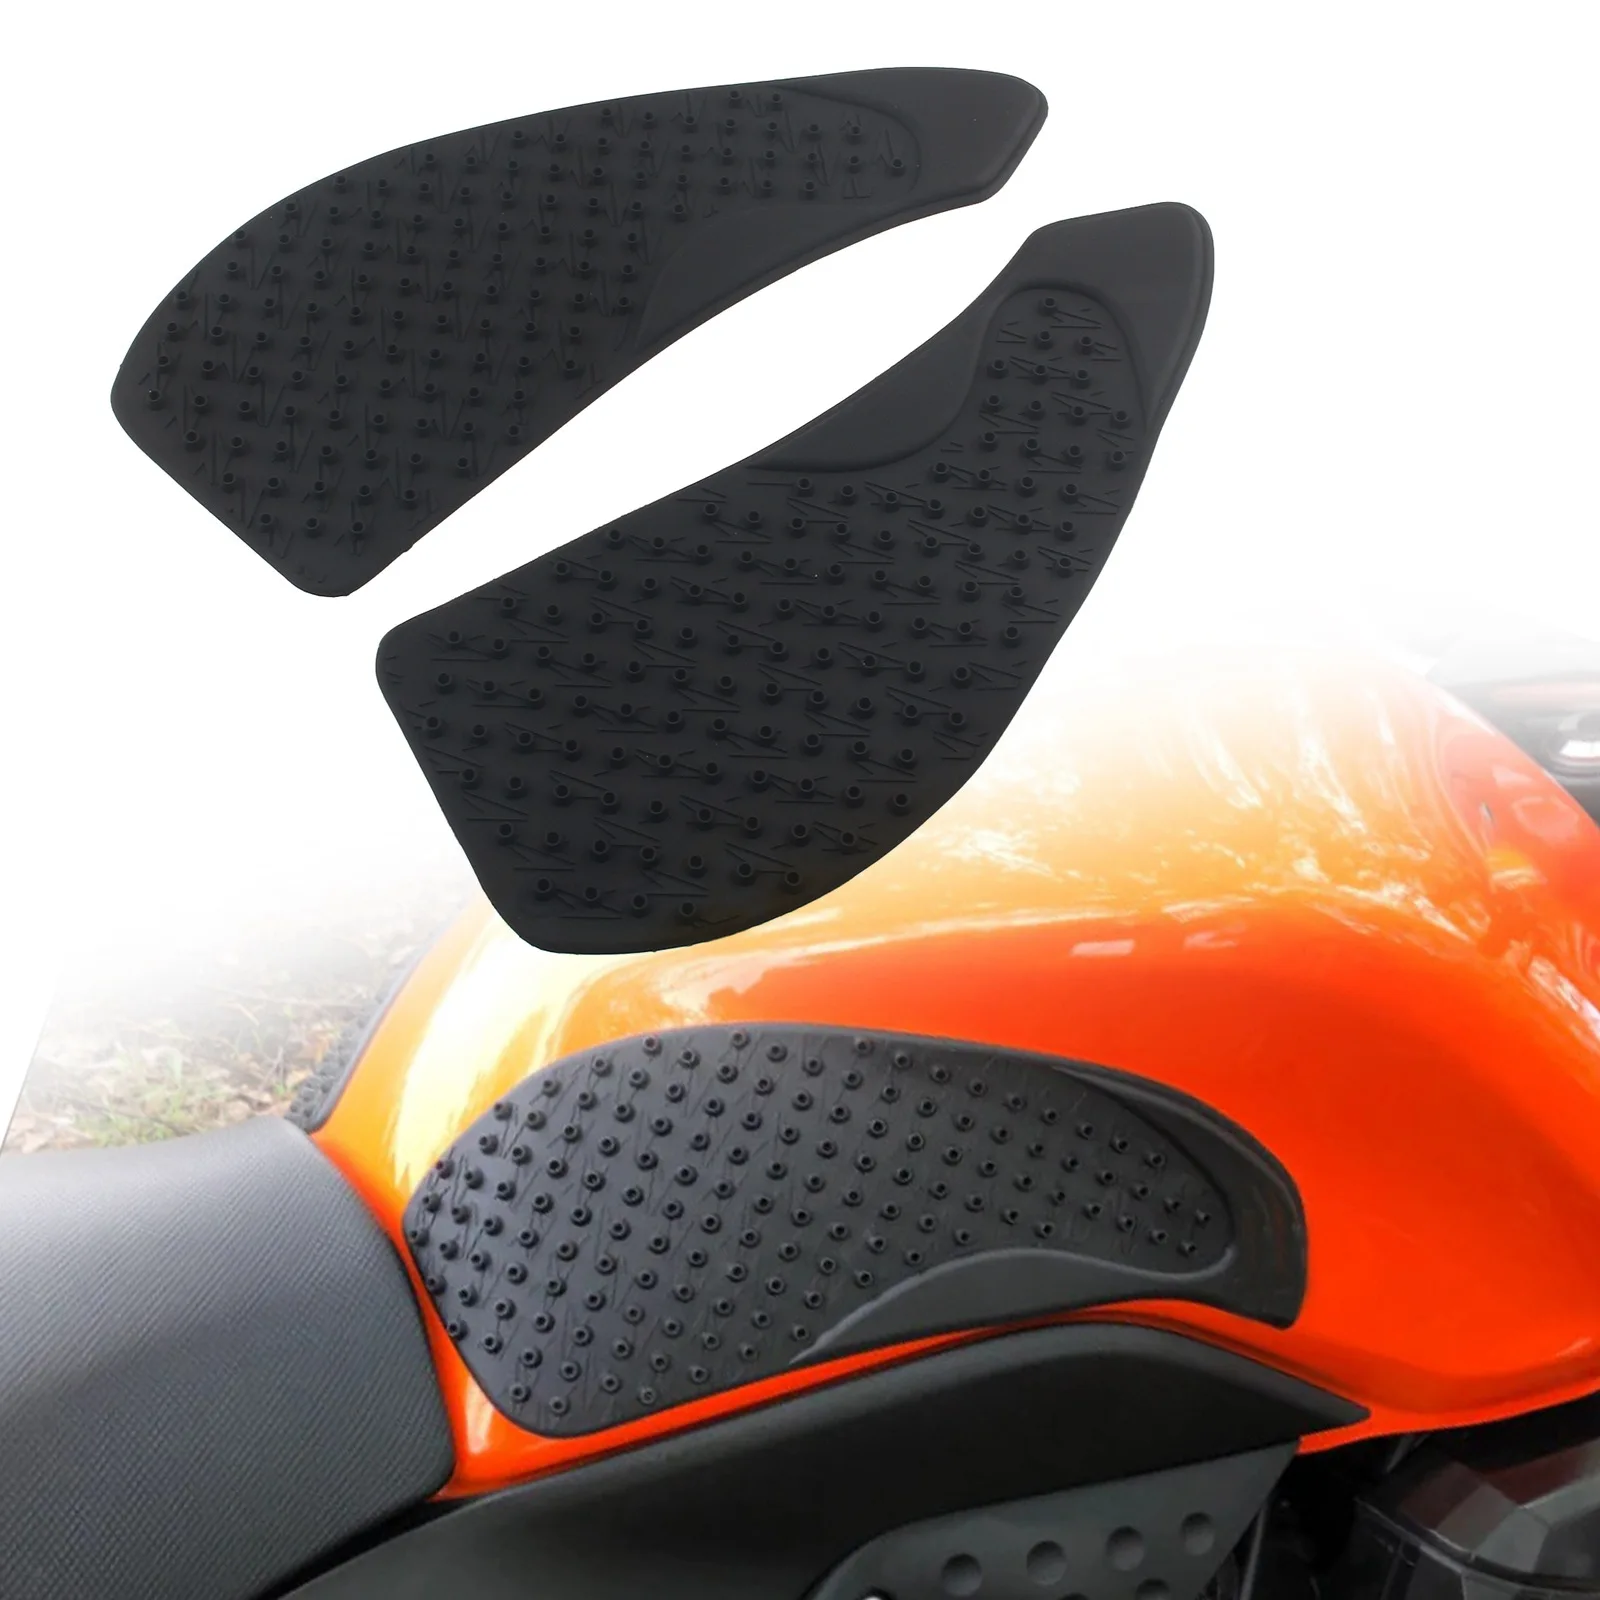 

2Pcs Motorcycle Fuel Tank Traction Side Pad Anti Slip Gas Fuel Knee Grip Stickers Decals For Kawasaki Z1000 Z 1000 2007-2009